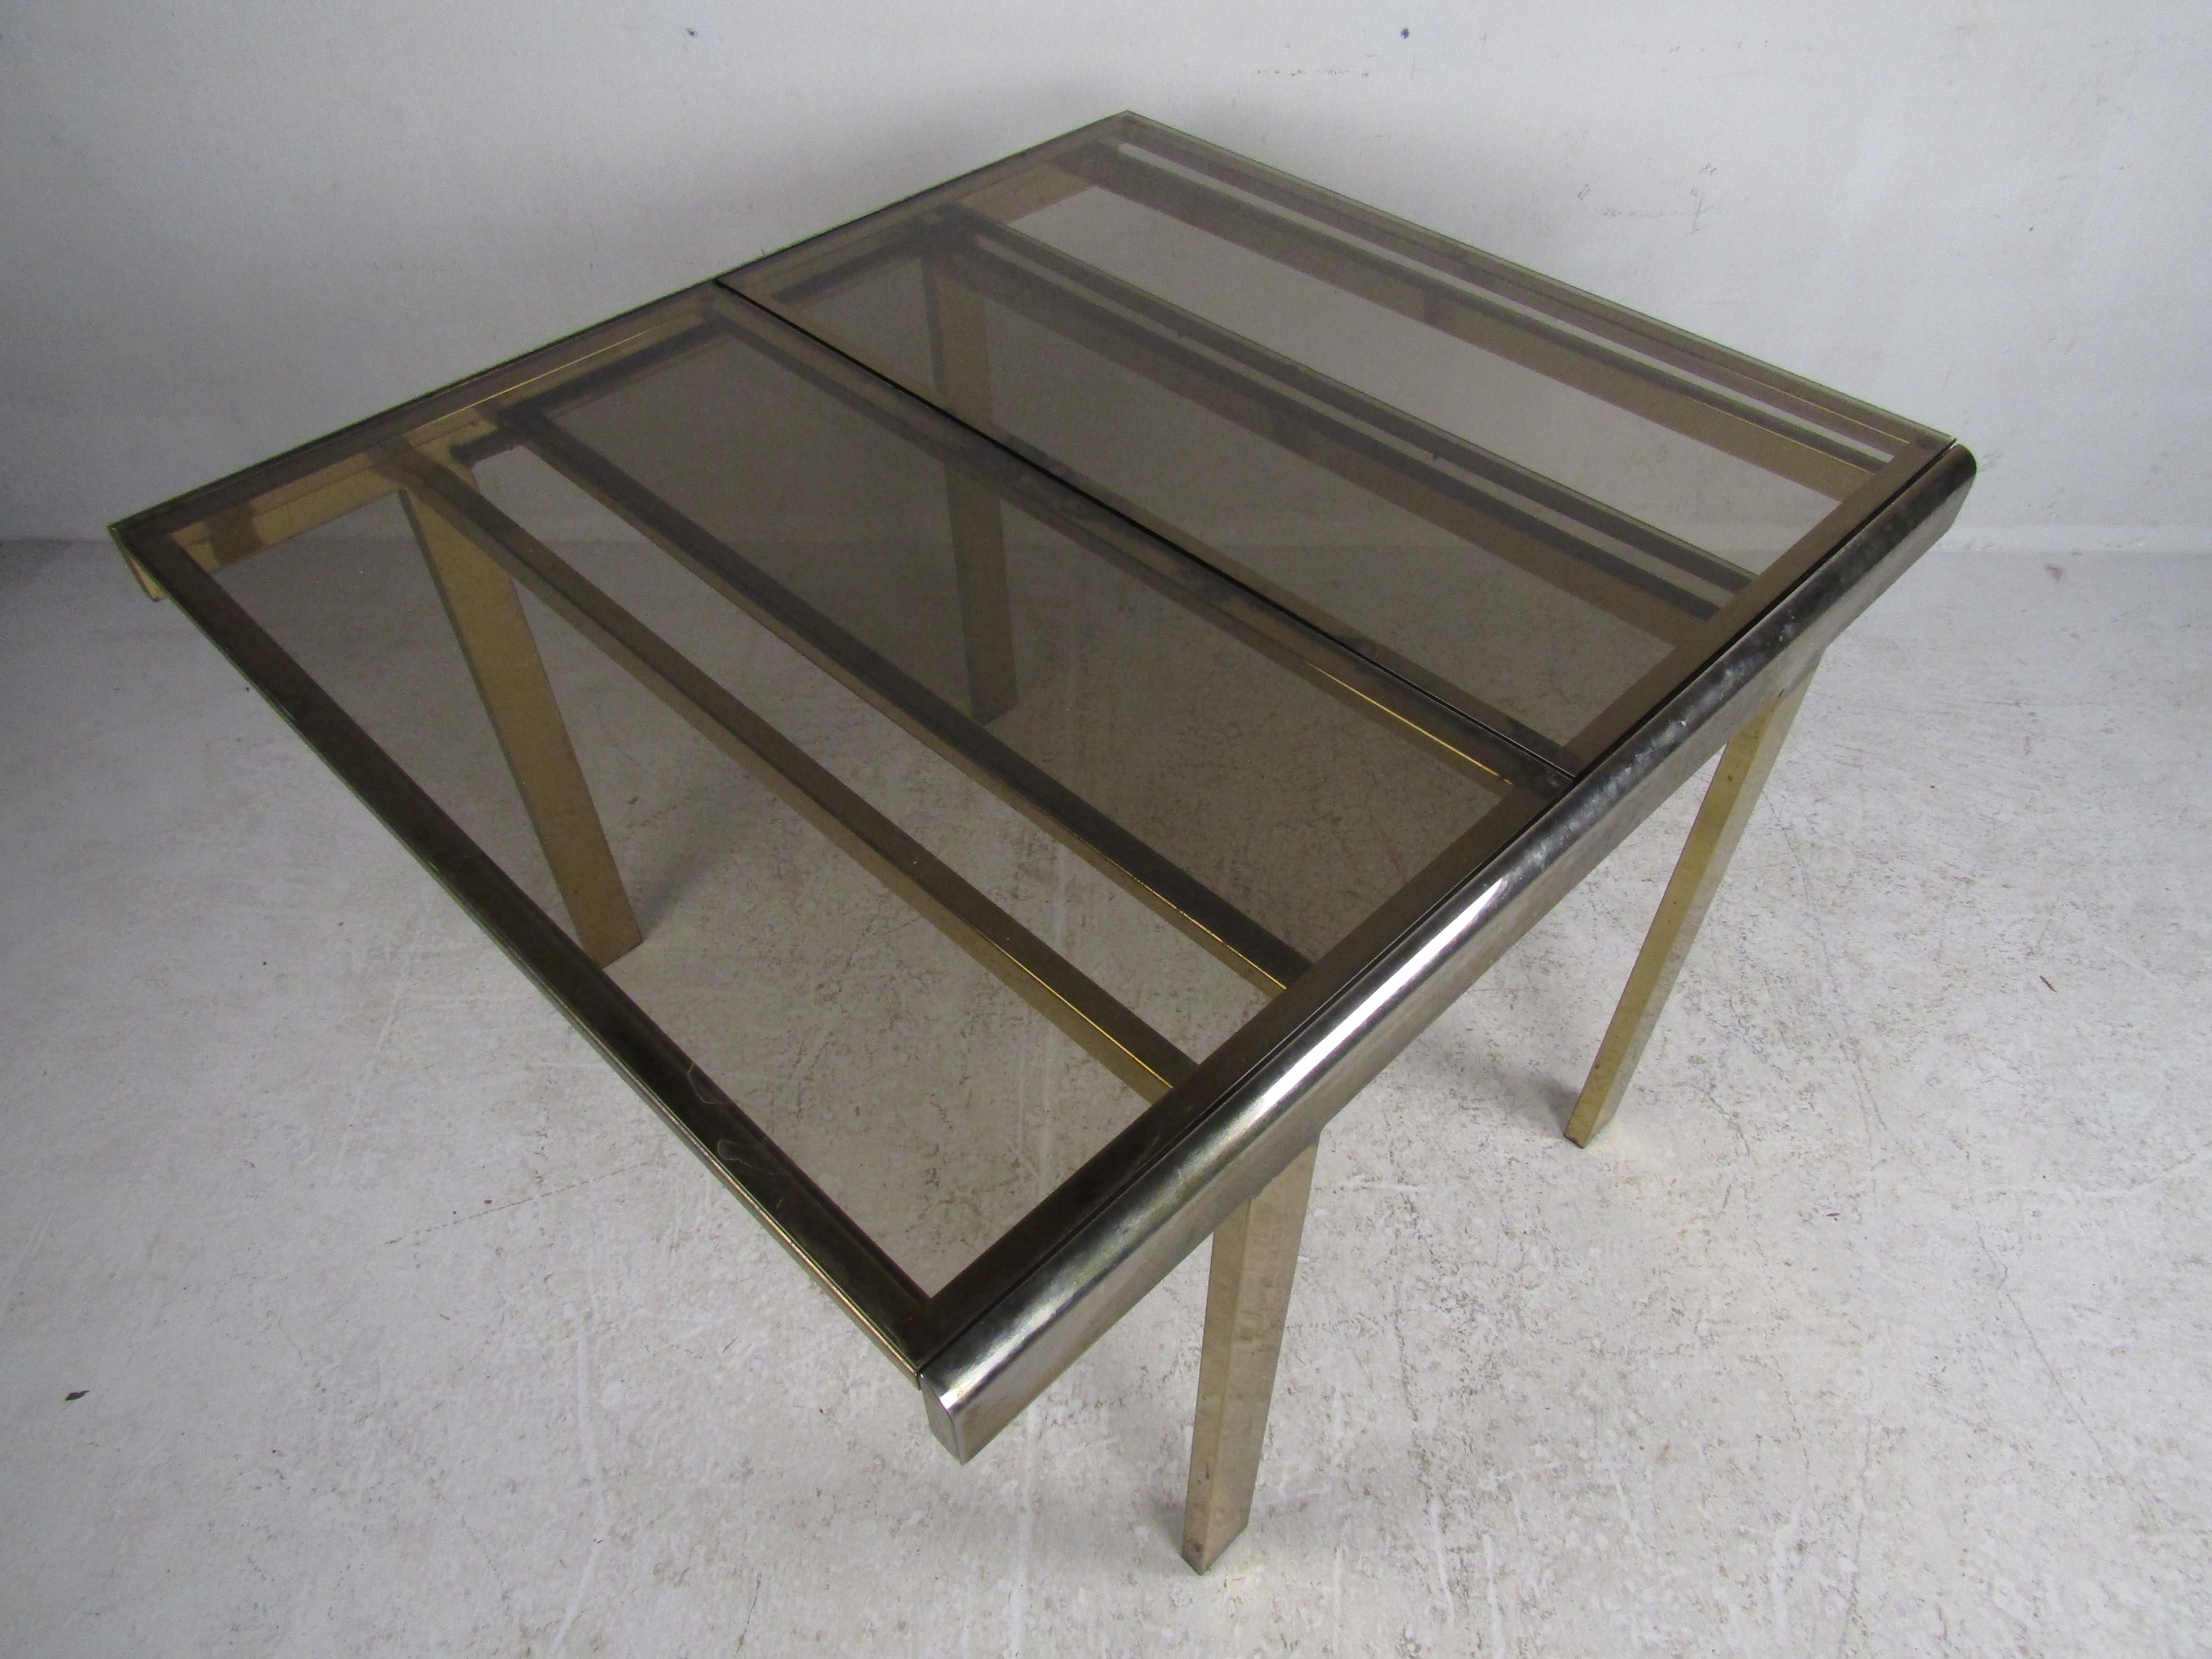 This vintage eye-catching Mastercraft style brass adjustable table with beautiful smoked/tinted glass conveniently expands to accommodate guests. Easily slides open to the length of 66